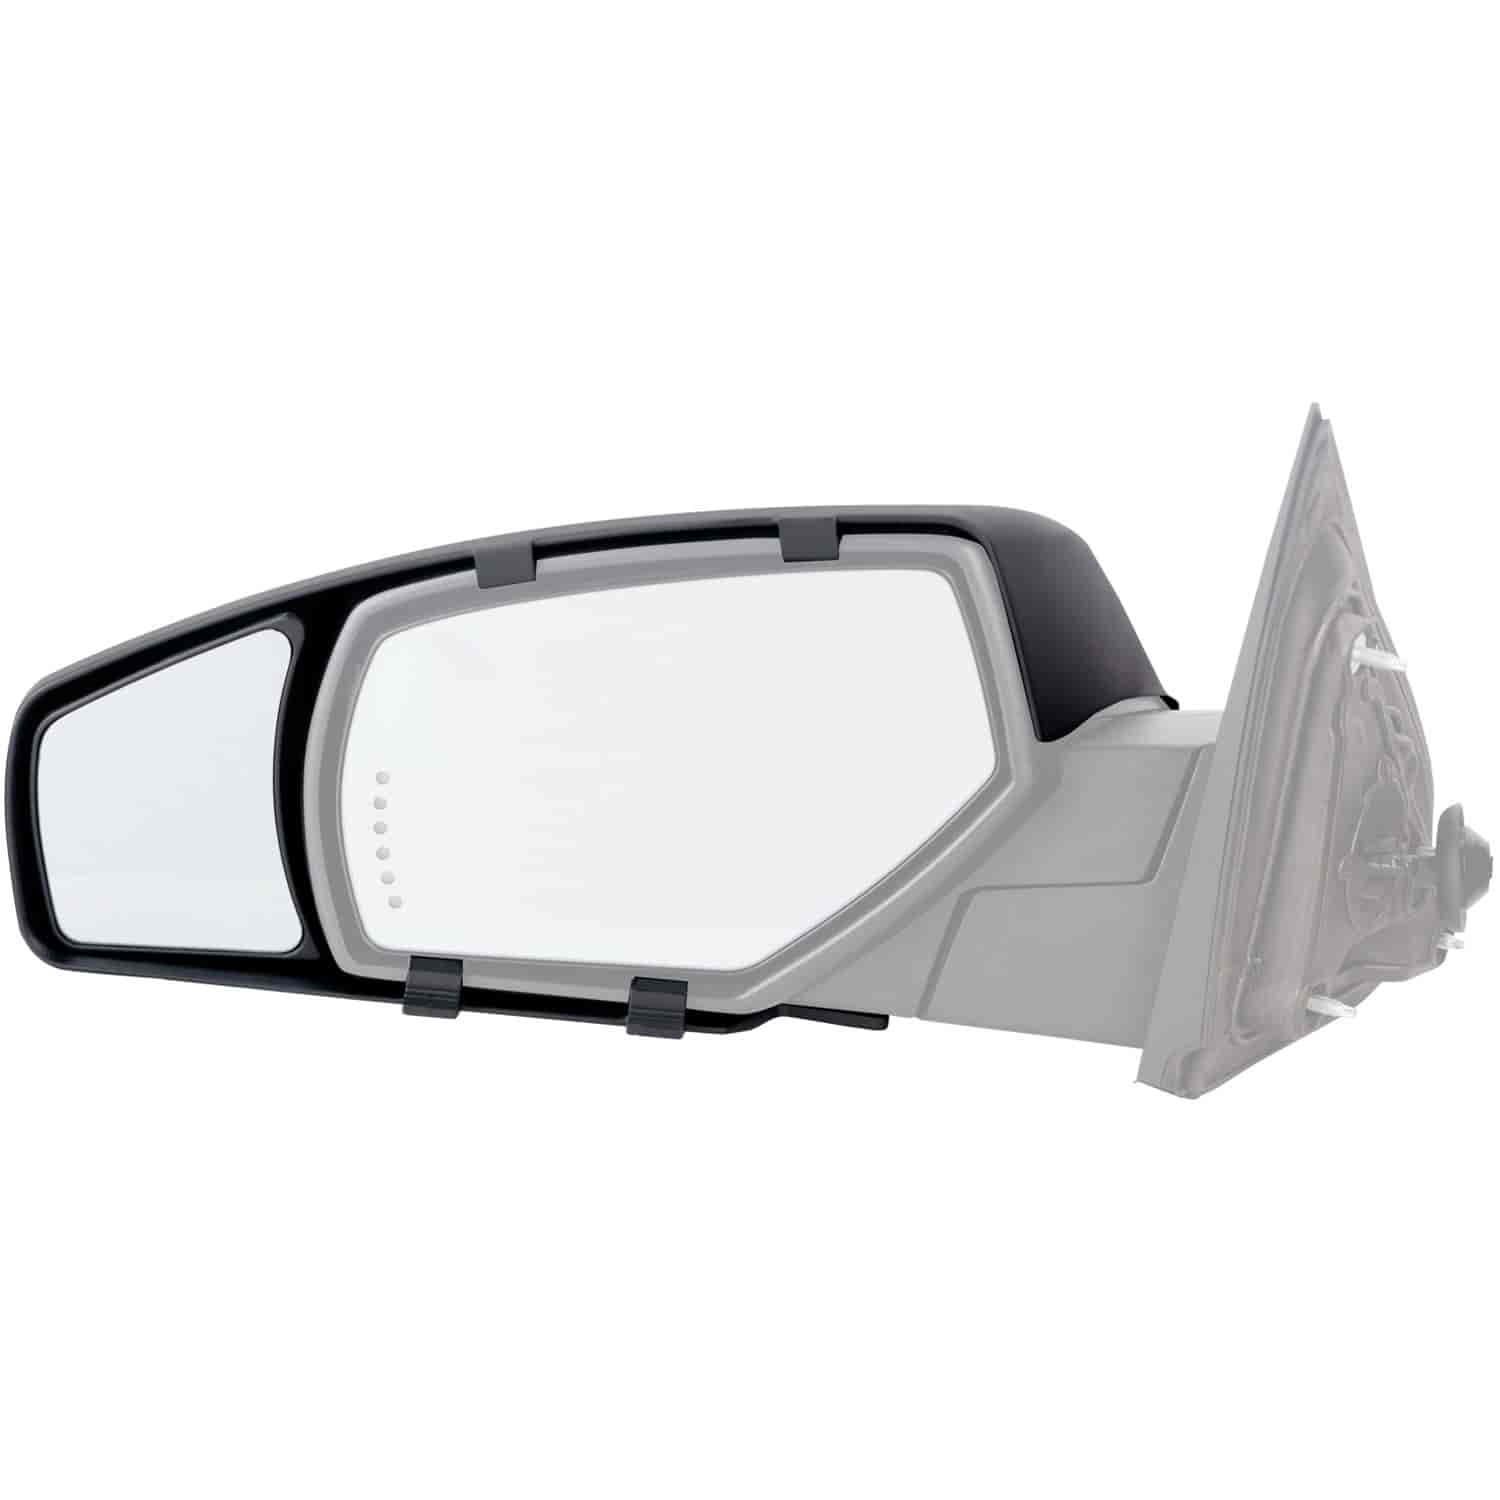 K-Source 80910: Snap-On Towing Mirrors Fits 2014-2018 Chevy Silverado & GMC  Sierra - JEGS